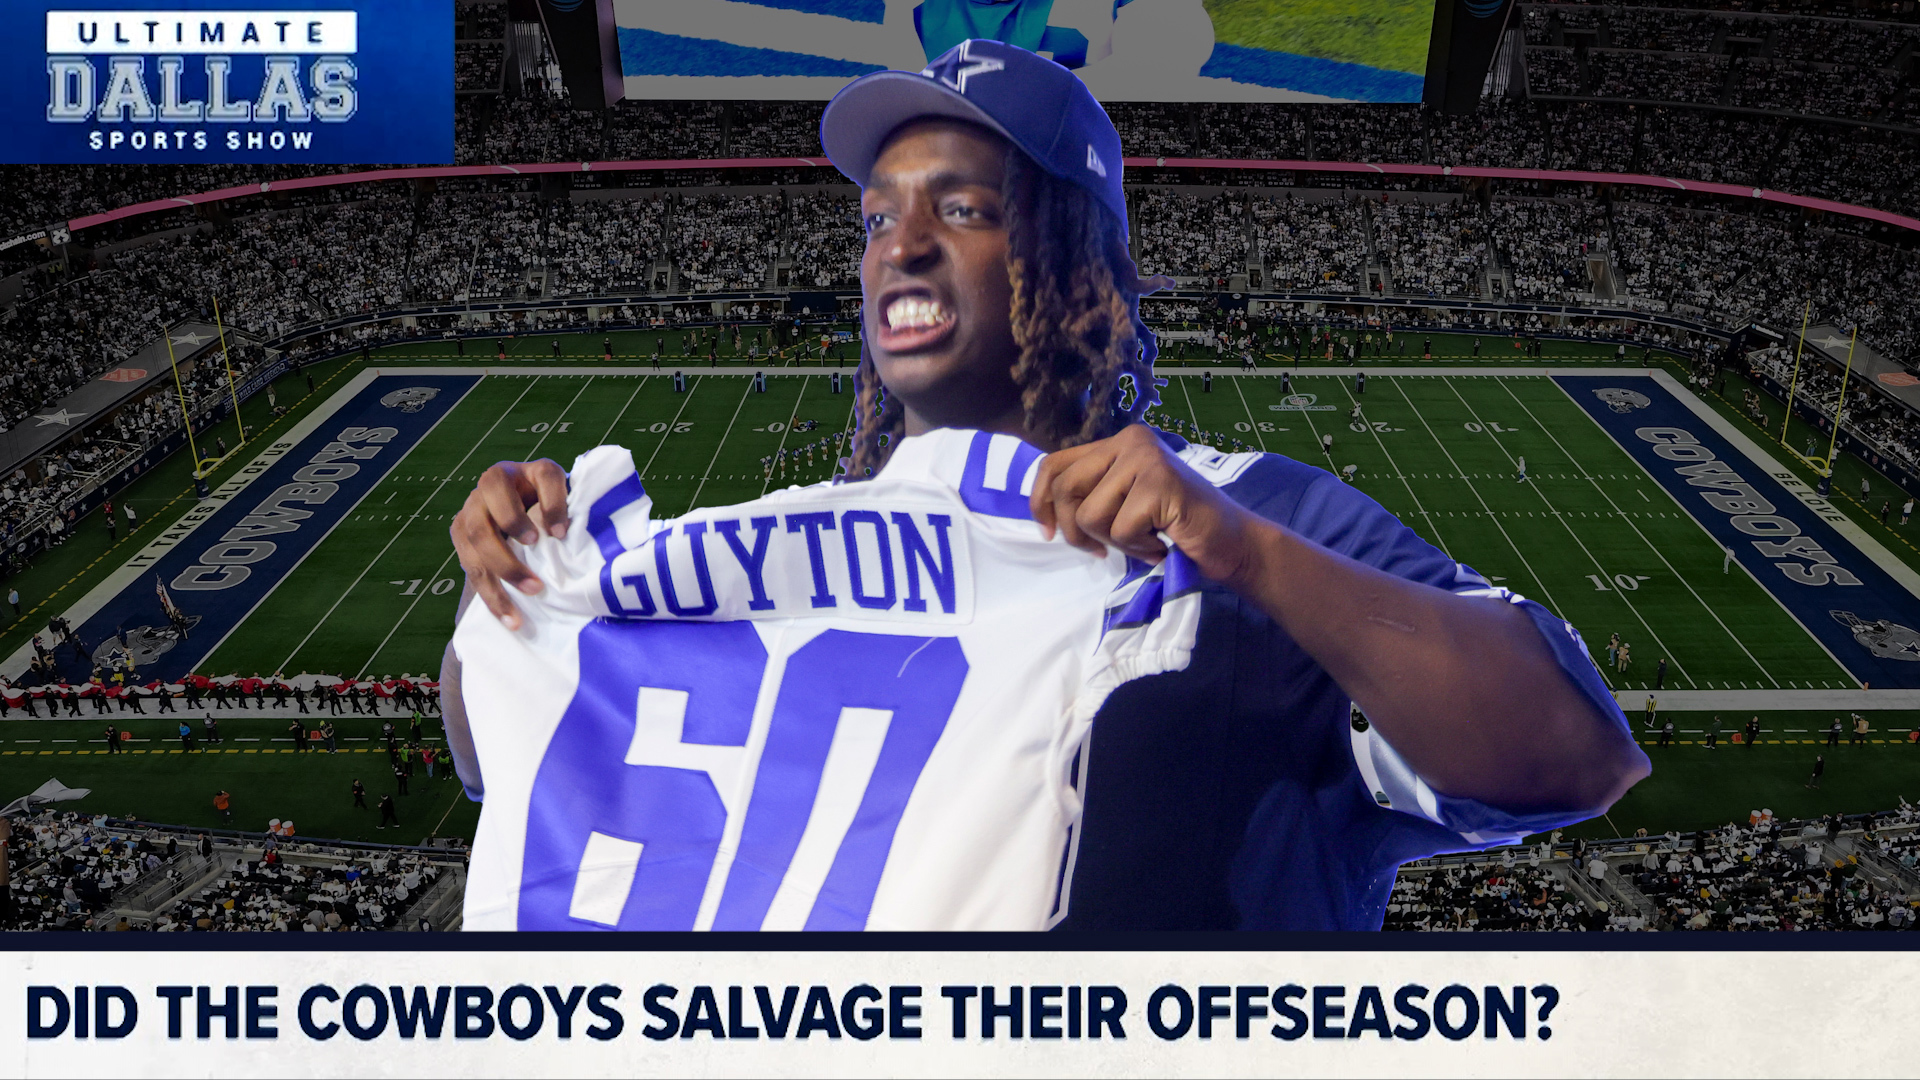 Following the conclusion of the 2024 NFL Draft, have the Cowboys salvaged their offseason? The Ultimate Dallas Sports Show discusses!